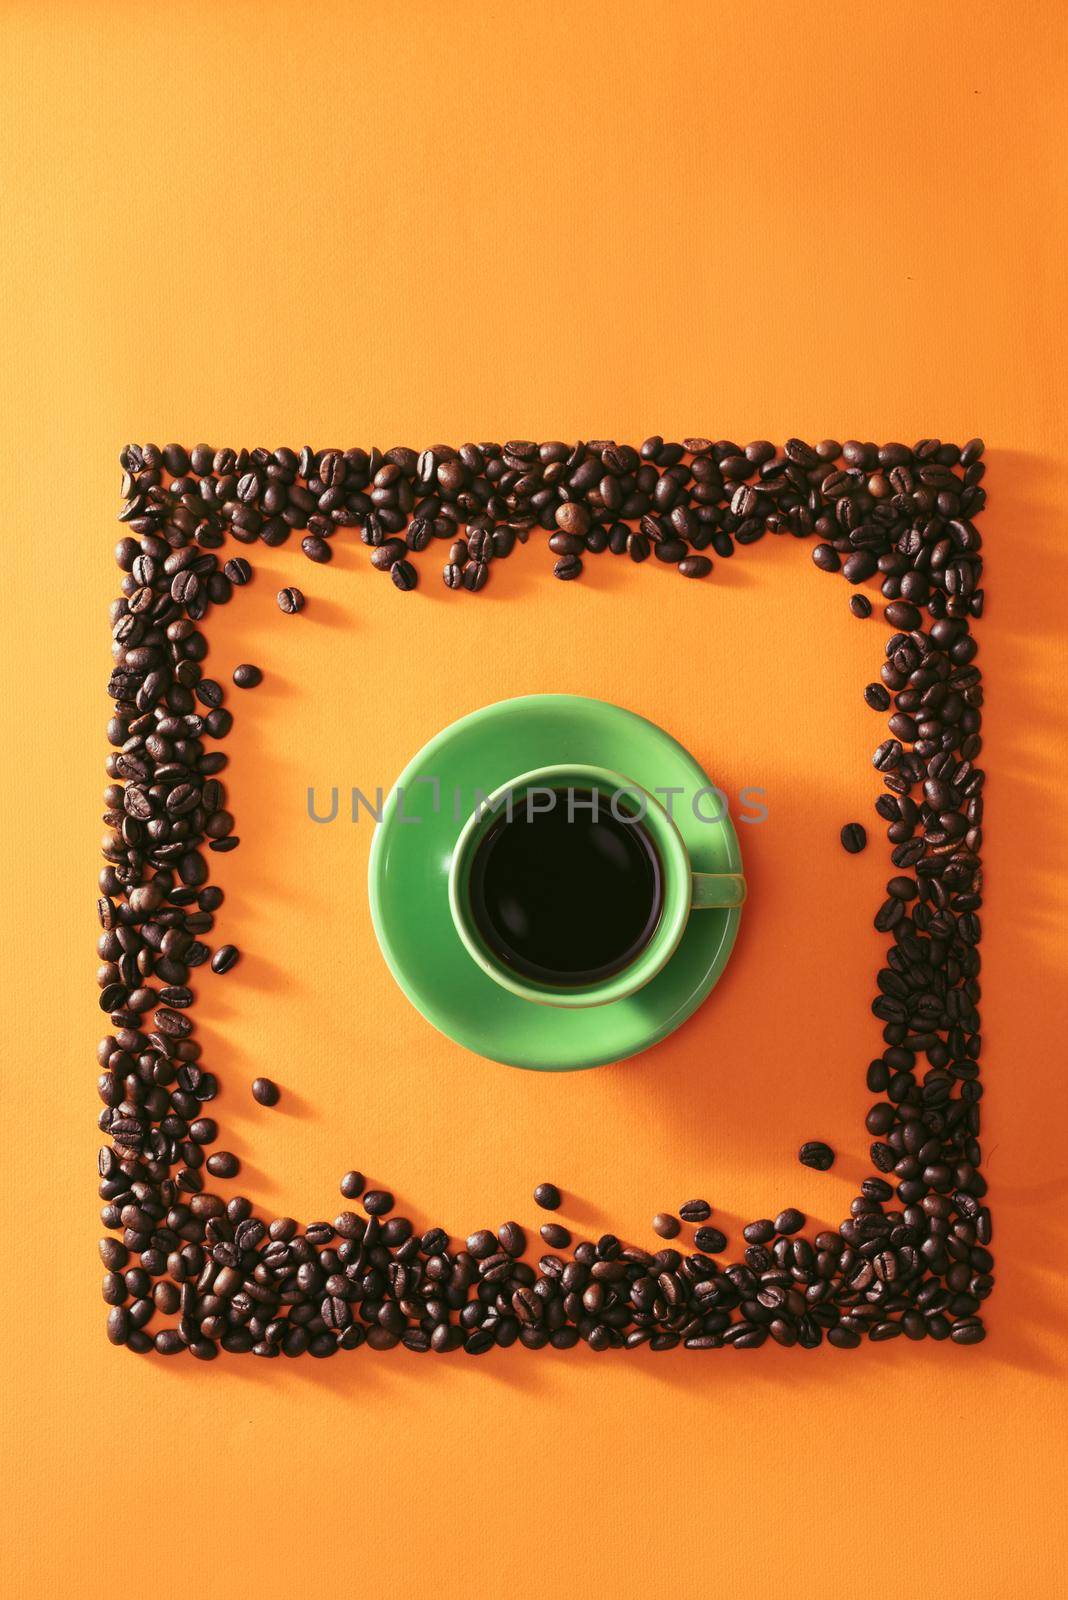 Green cup of coffee in the middle of quare shape coffee beans on orange background